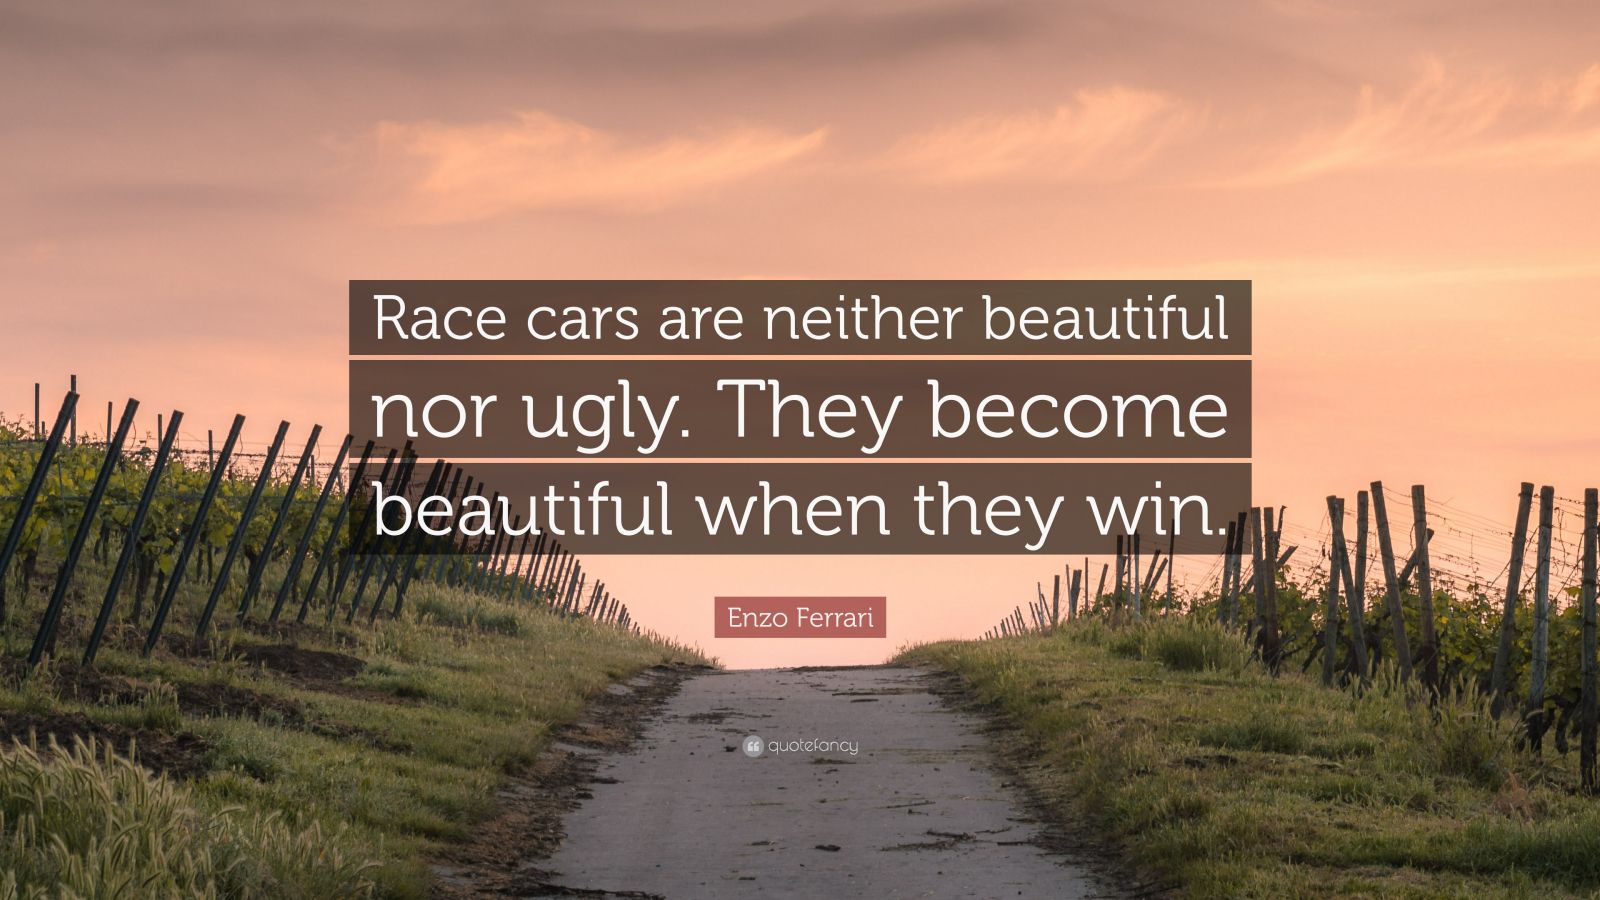 Enzo Ferrari Quote: "Race cars are neither beautiful nor ugly. They become beautiful when they ...